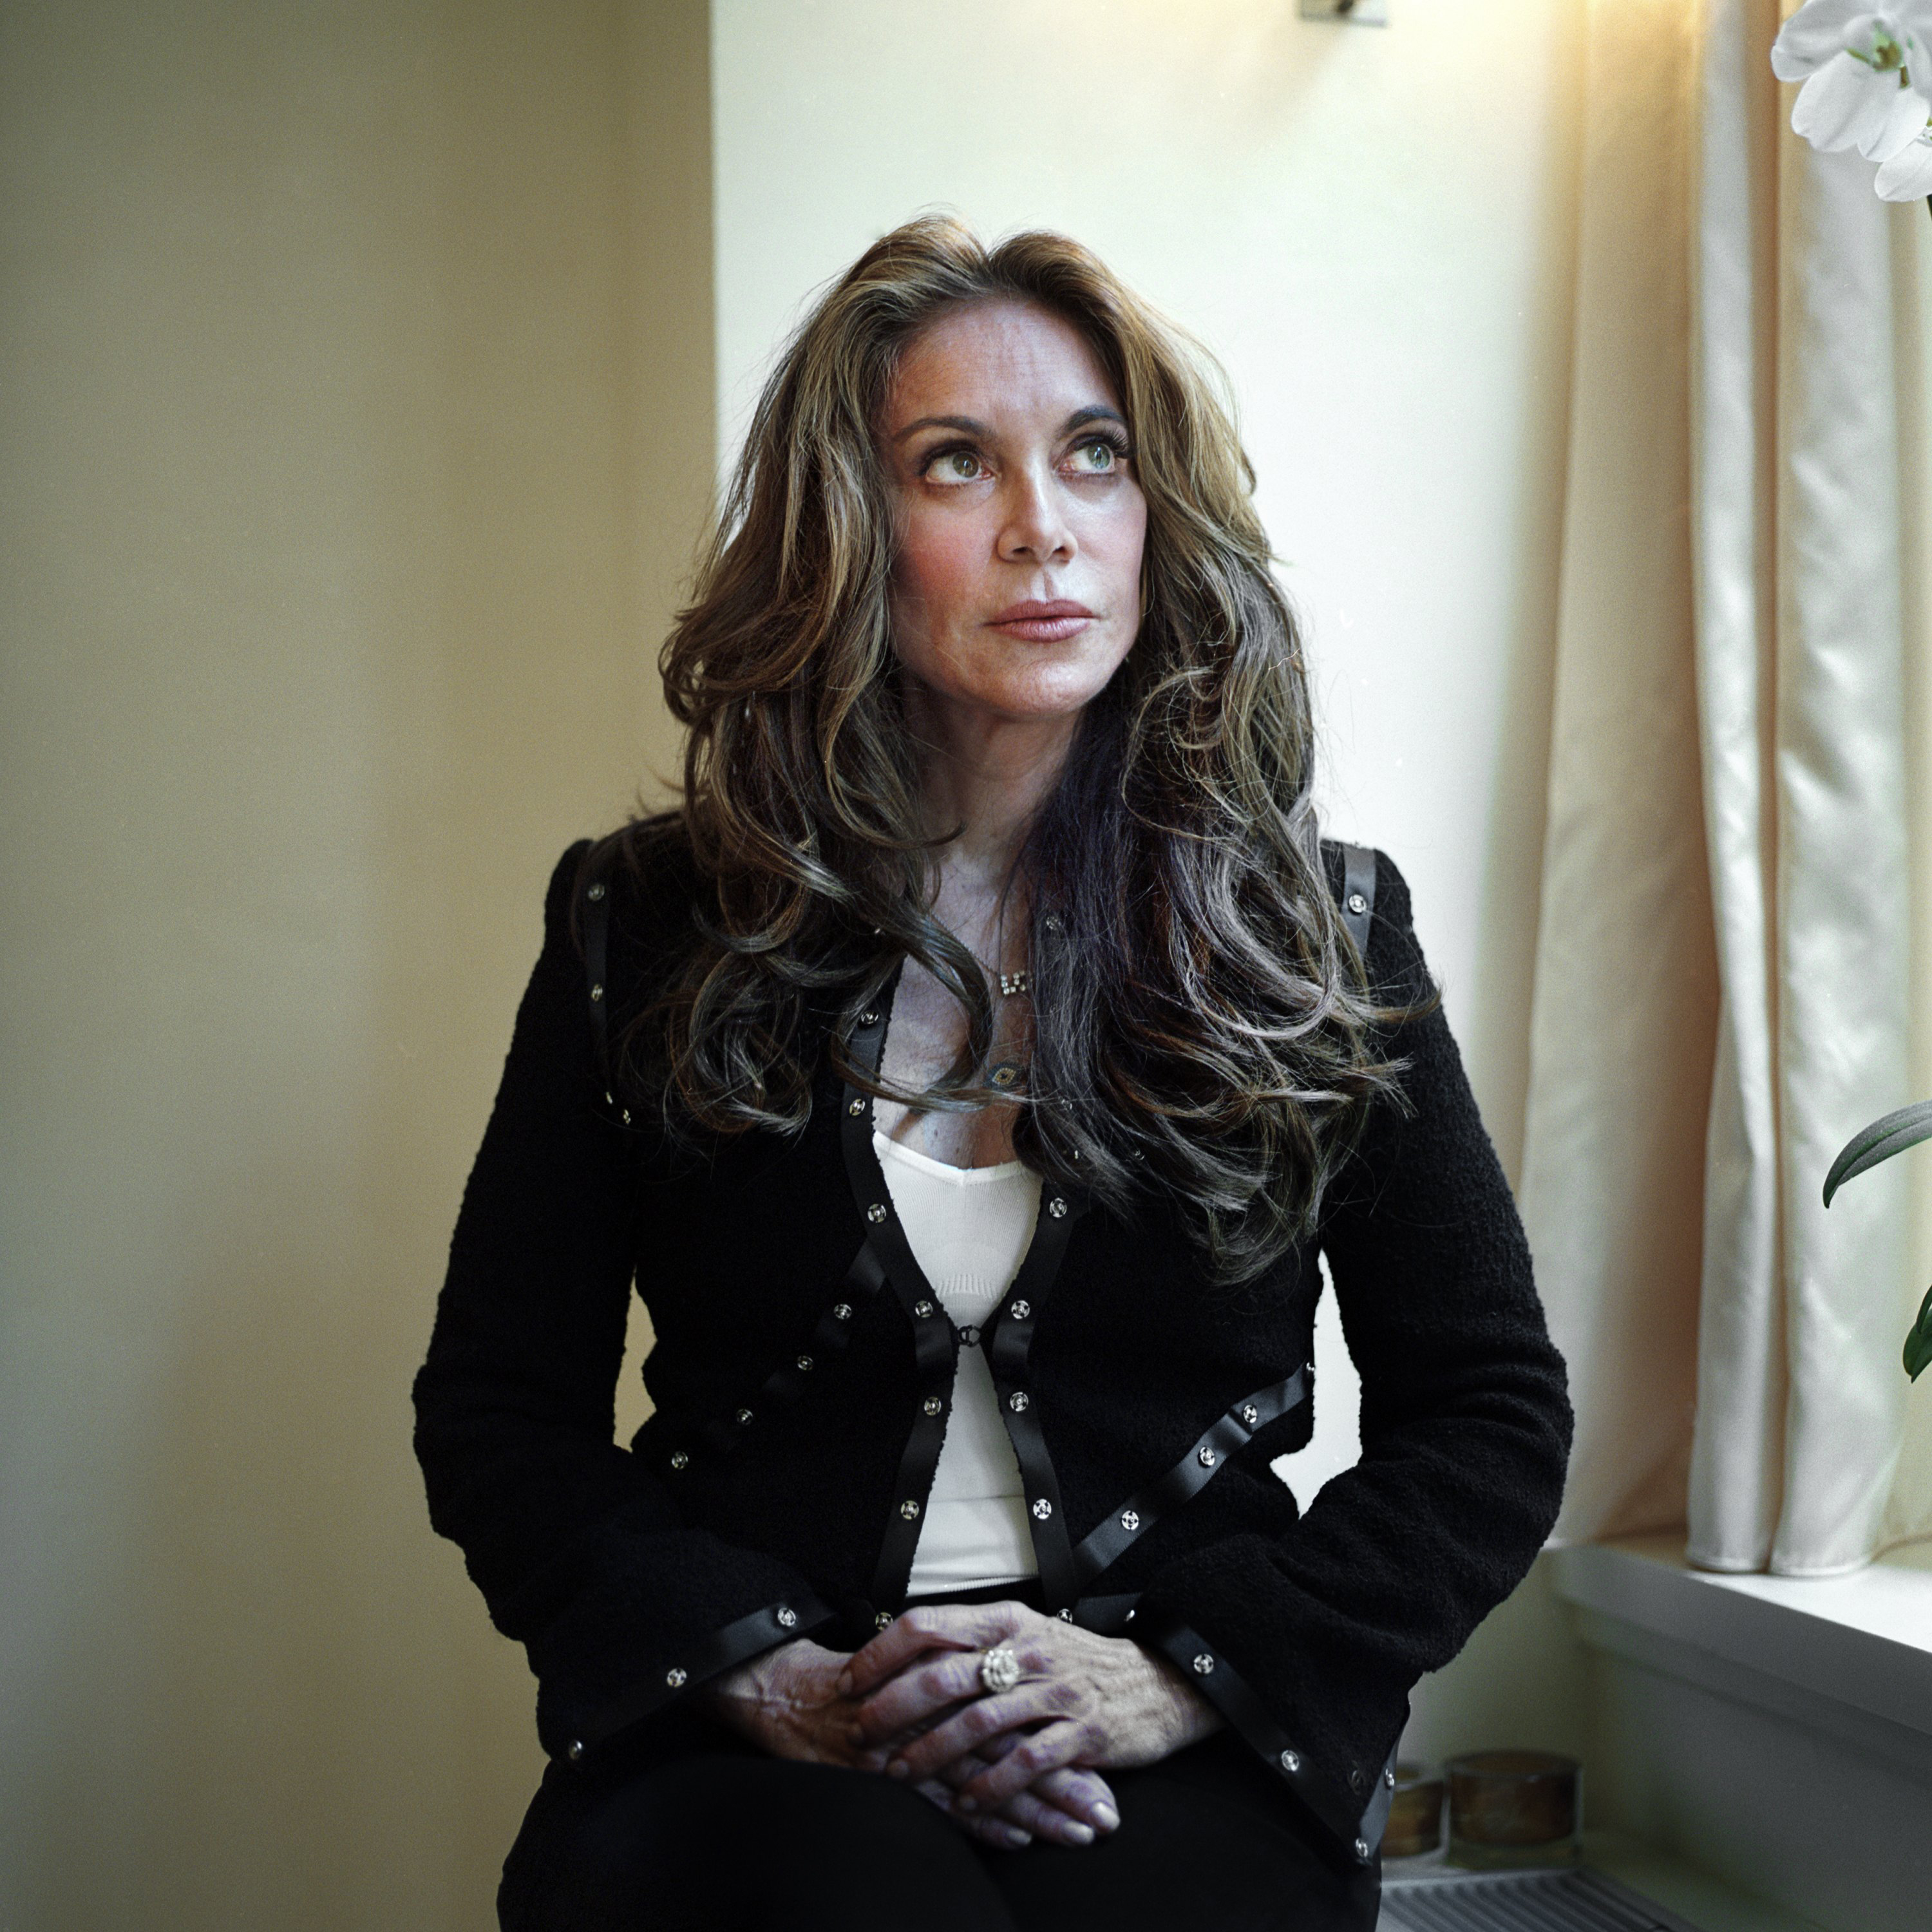 Pamela Geller, author of the book The Post-American Presidency and an opponent of the proposed World Trade Center Islamic Center poses for a portrait inside her home on August 3, 2010 in New York City. (Jason Andrew—Getty Images)